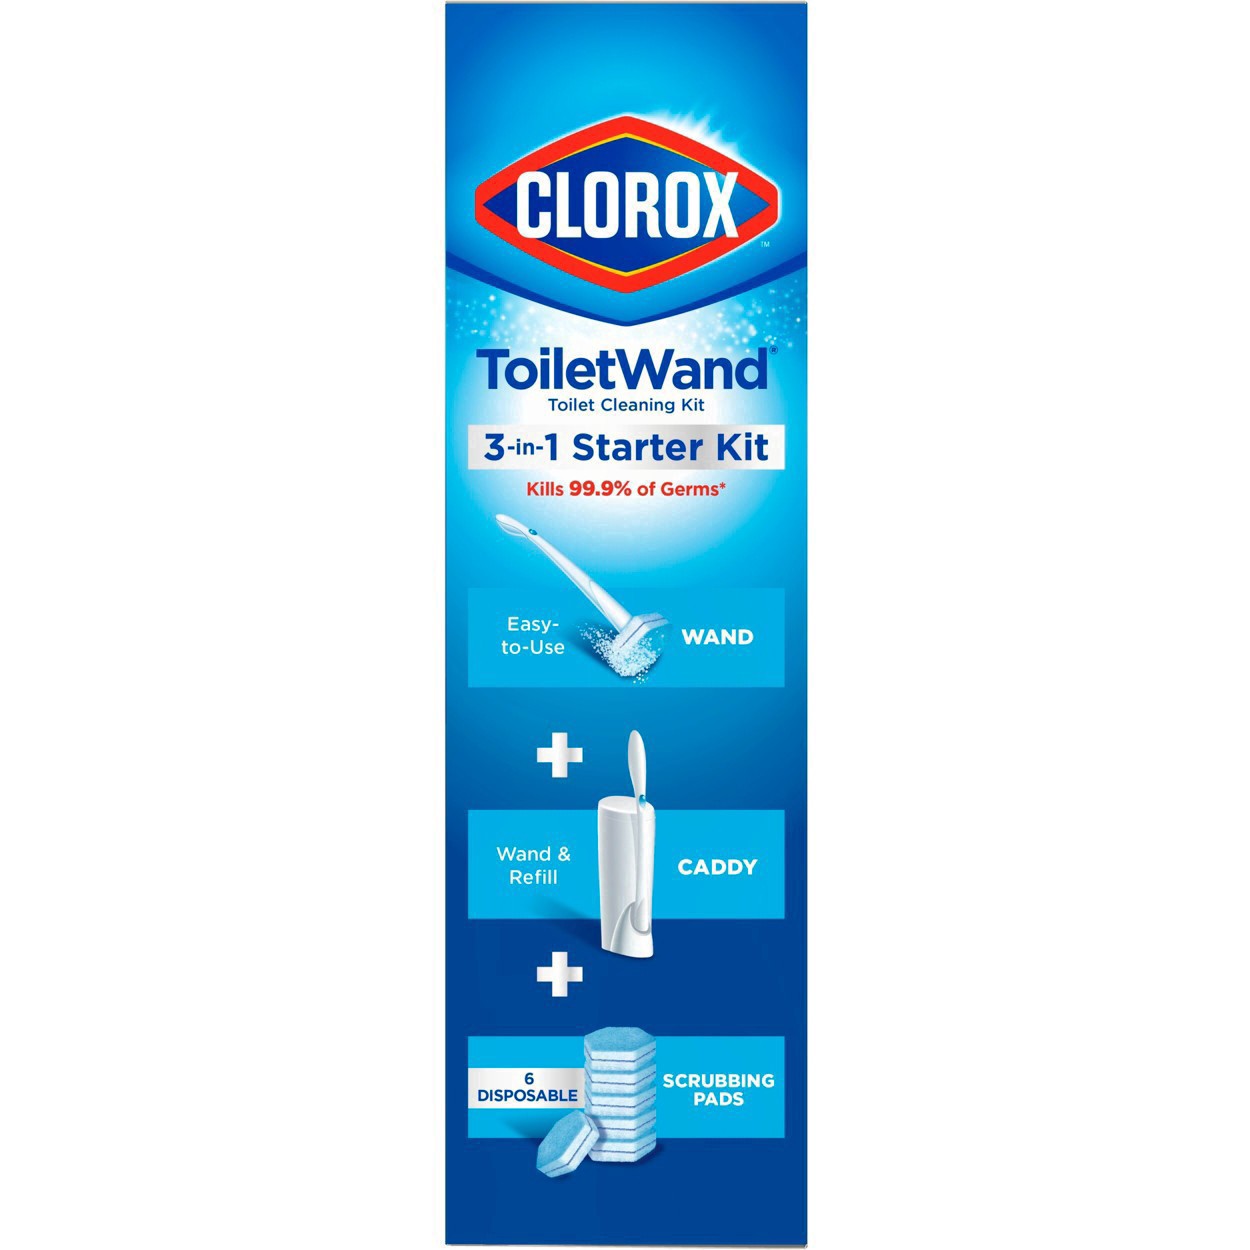 slide 79 of 176, Clorox Toilet Wand 3-in-1 Starter Toliet Cleaning Kit, 1 ct